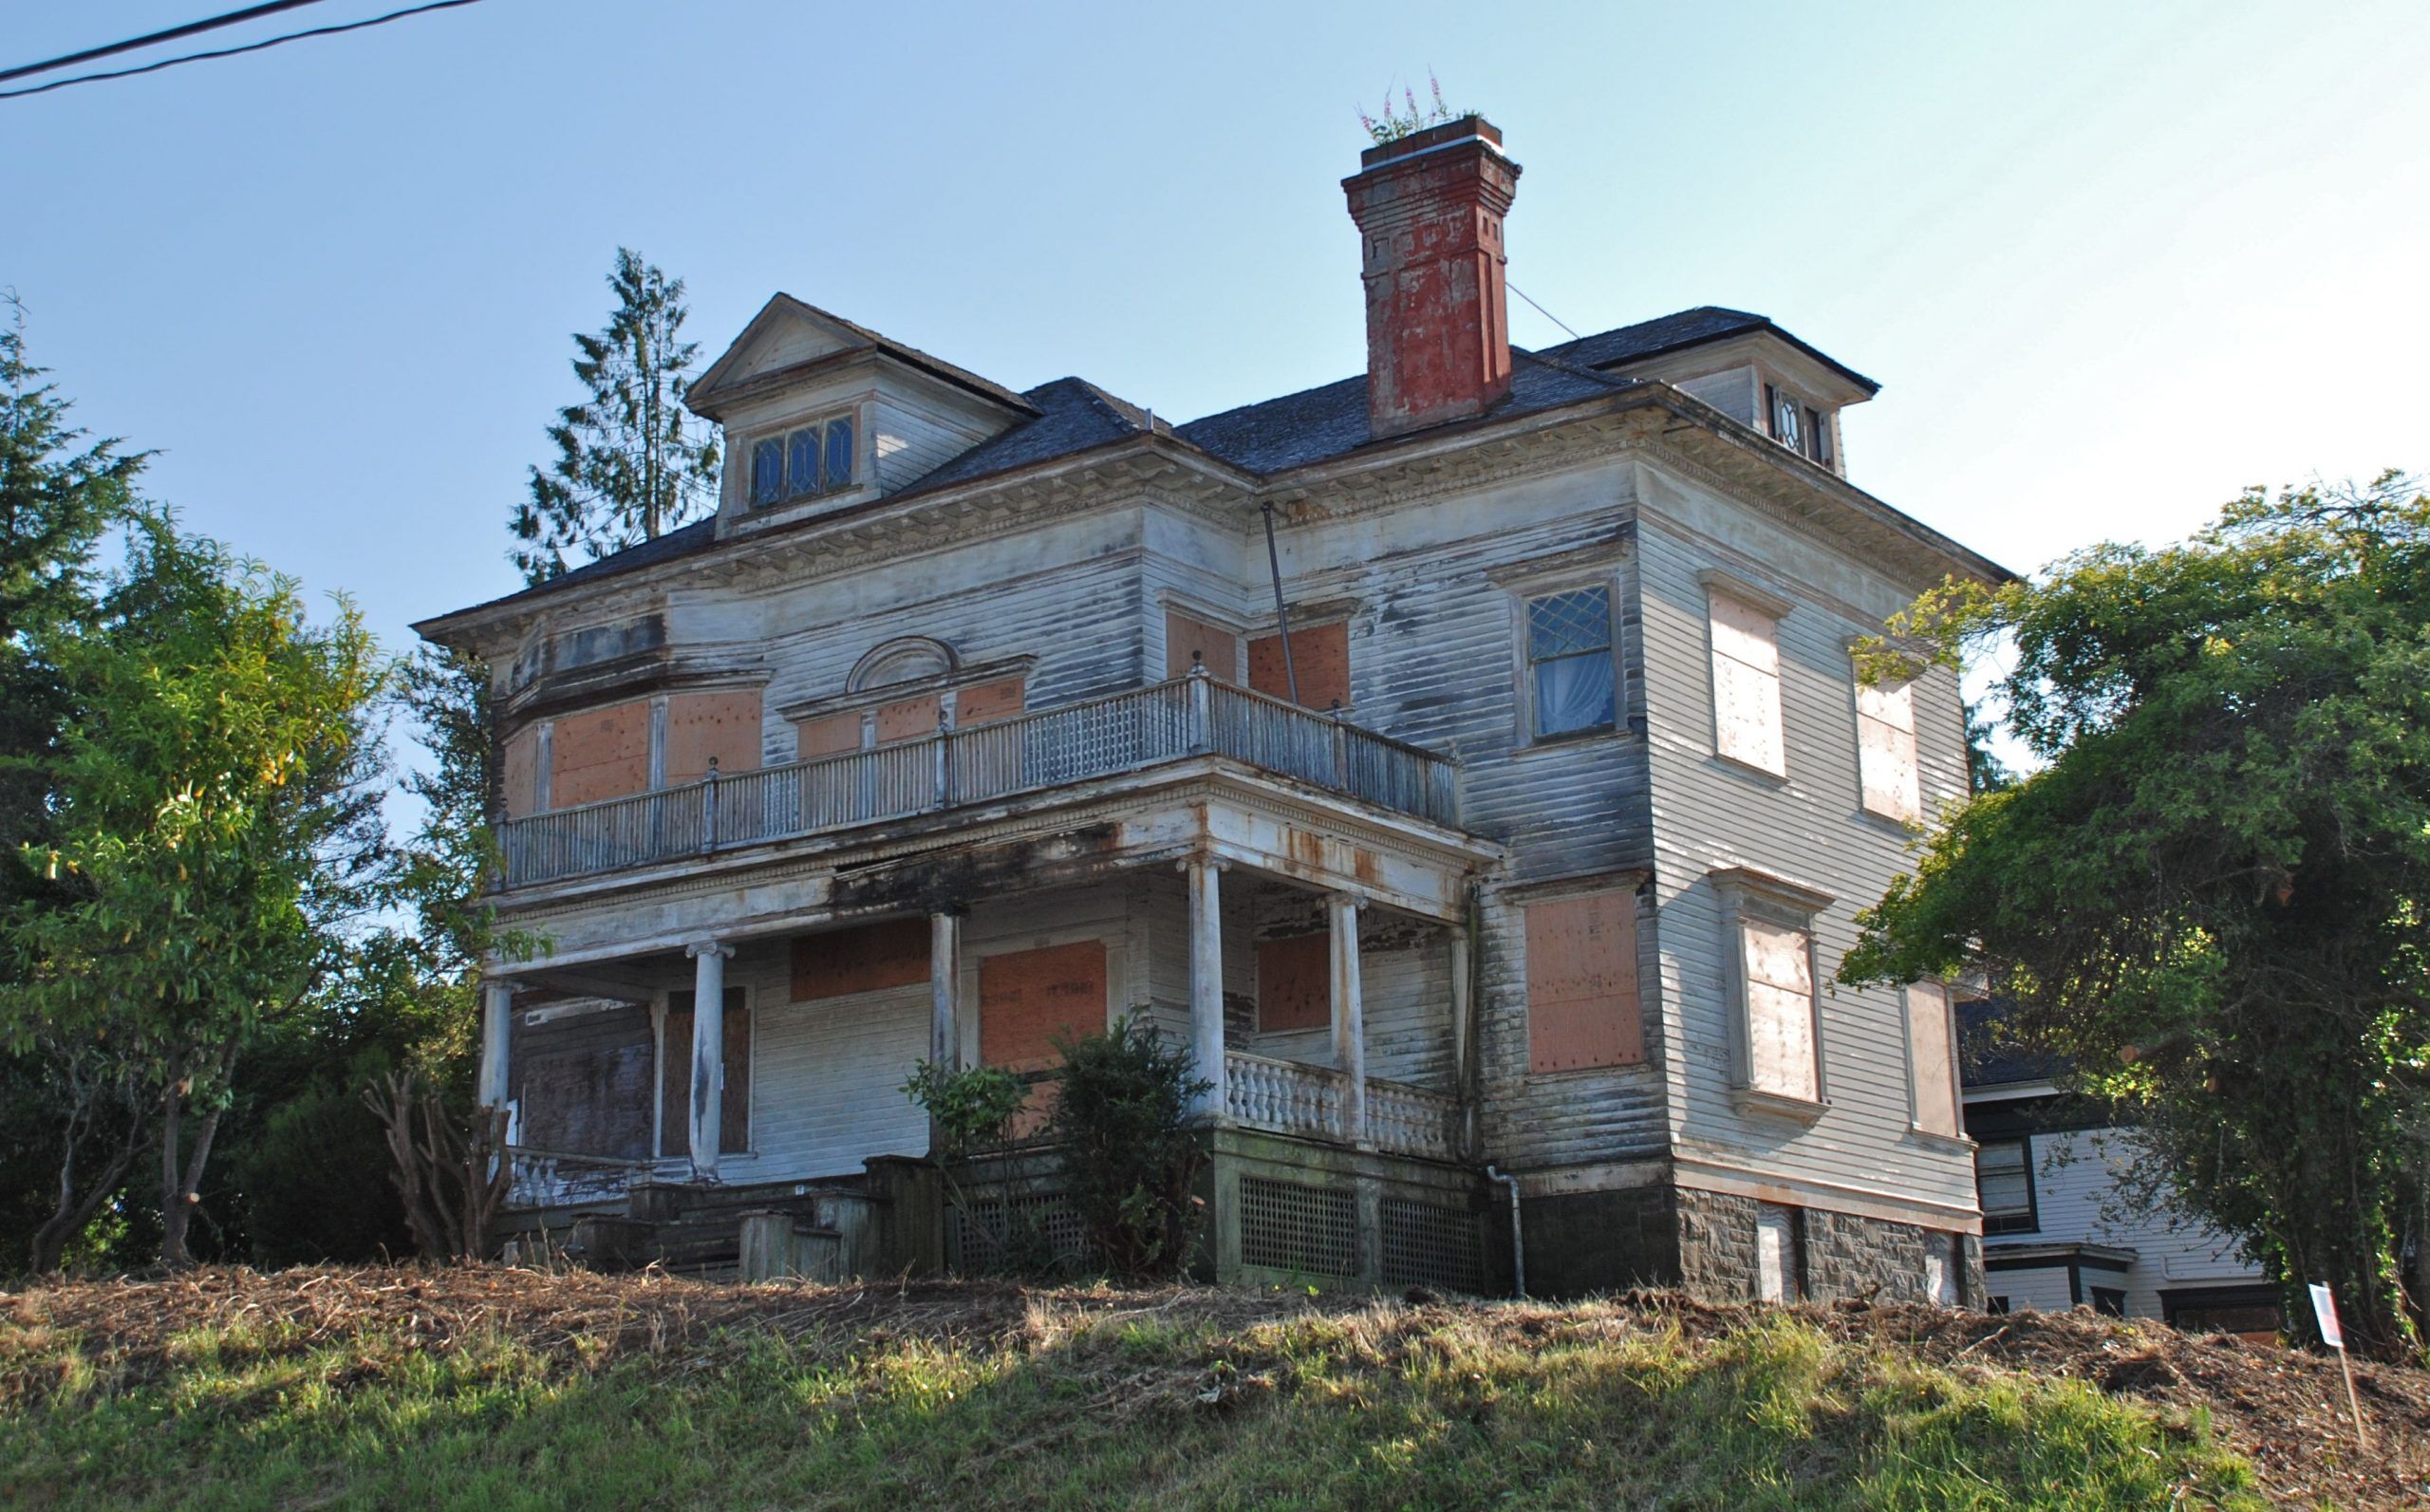 The Harry Flavel House in Astoria, Oregon